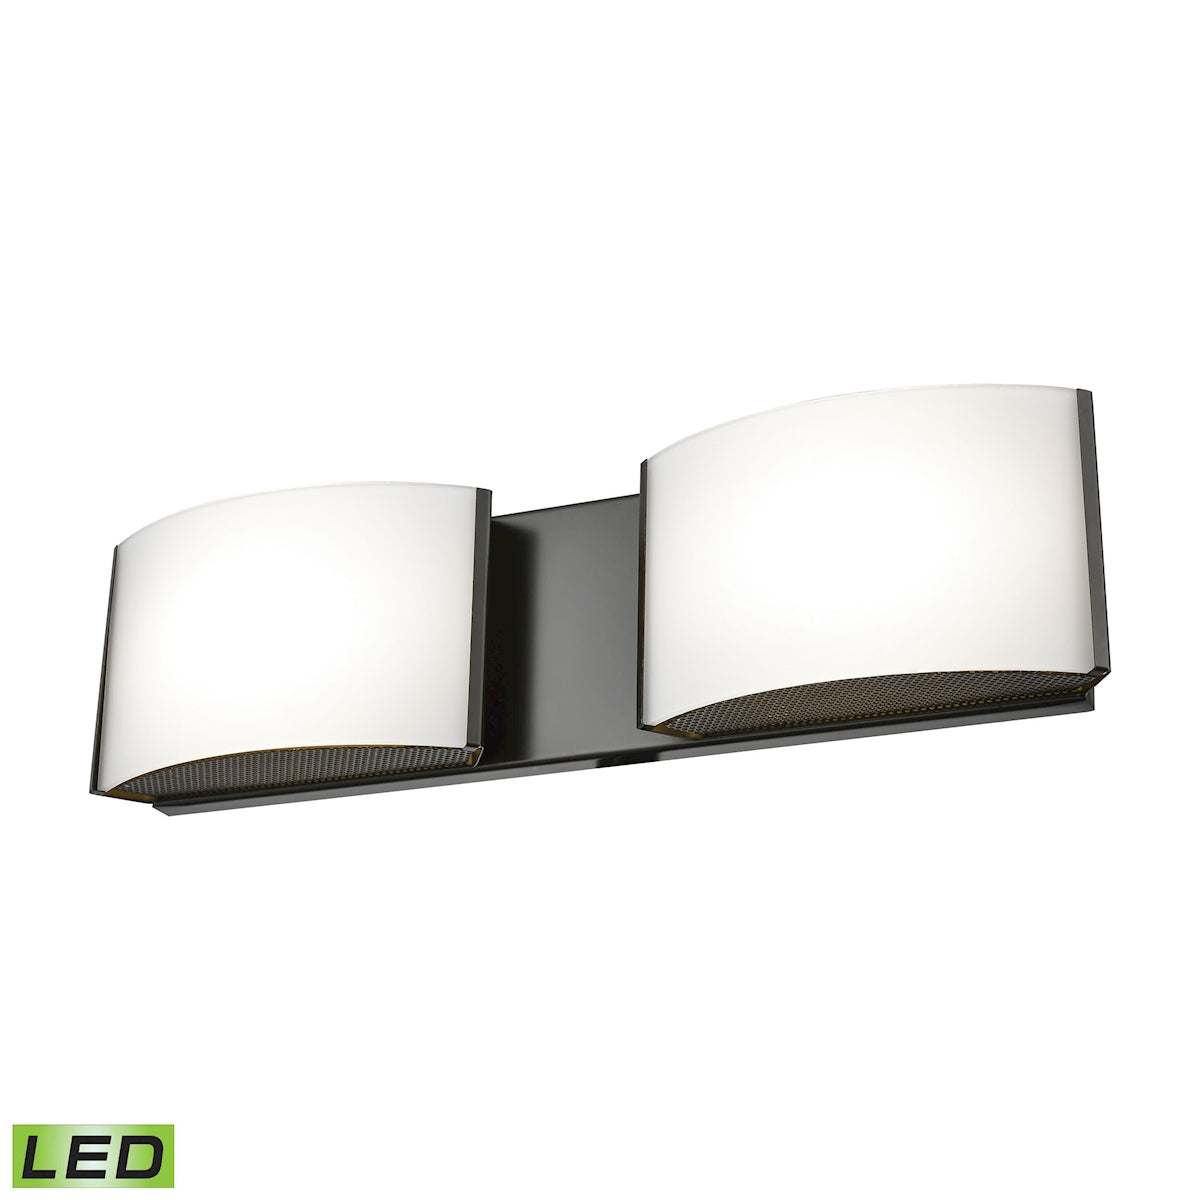 ELK Lighting BVL912-10-45 Pandora 2-Light Vanity Sconce in Oiled Bronze with Opal Glass - Integrated LED